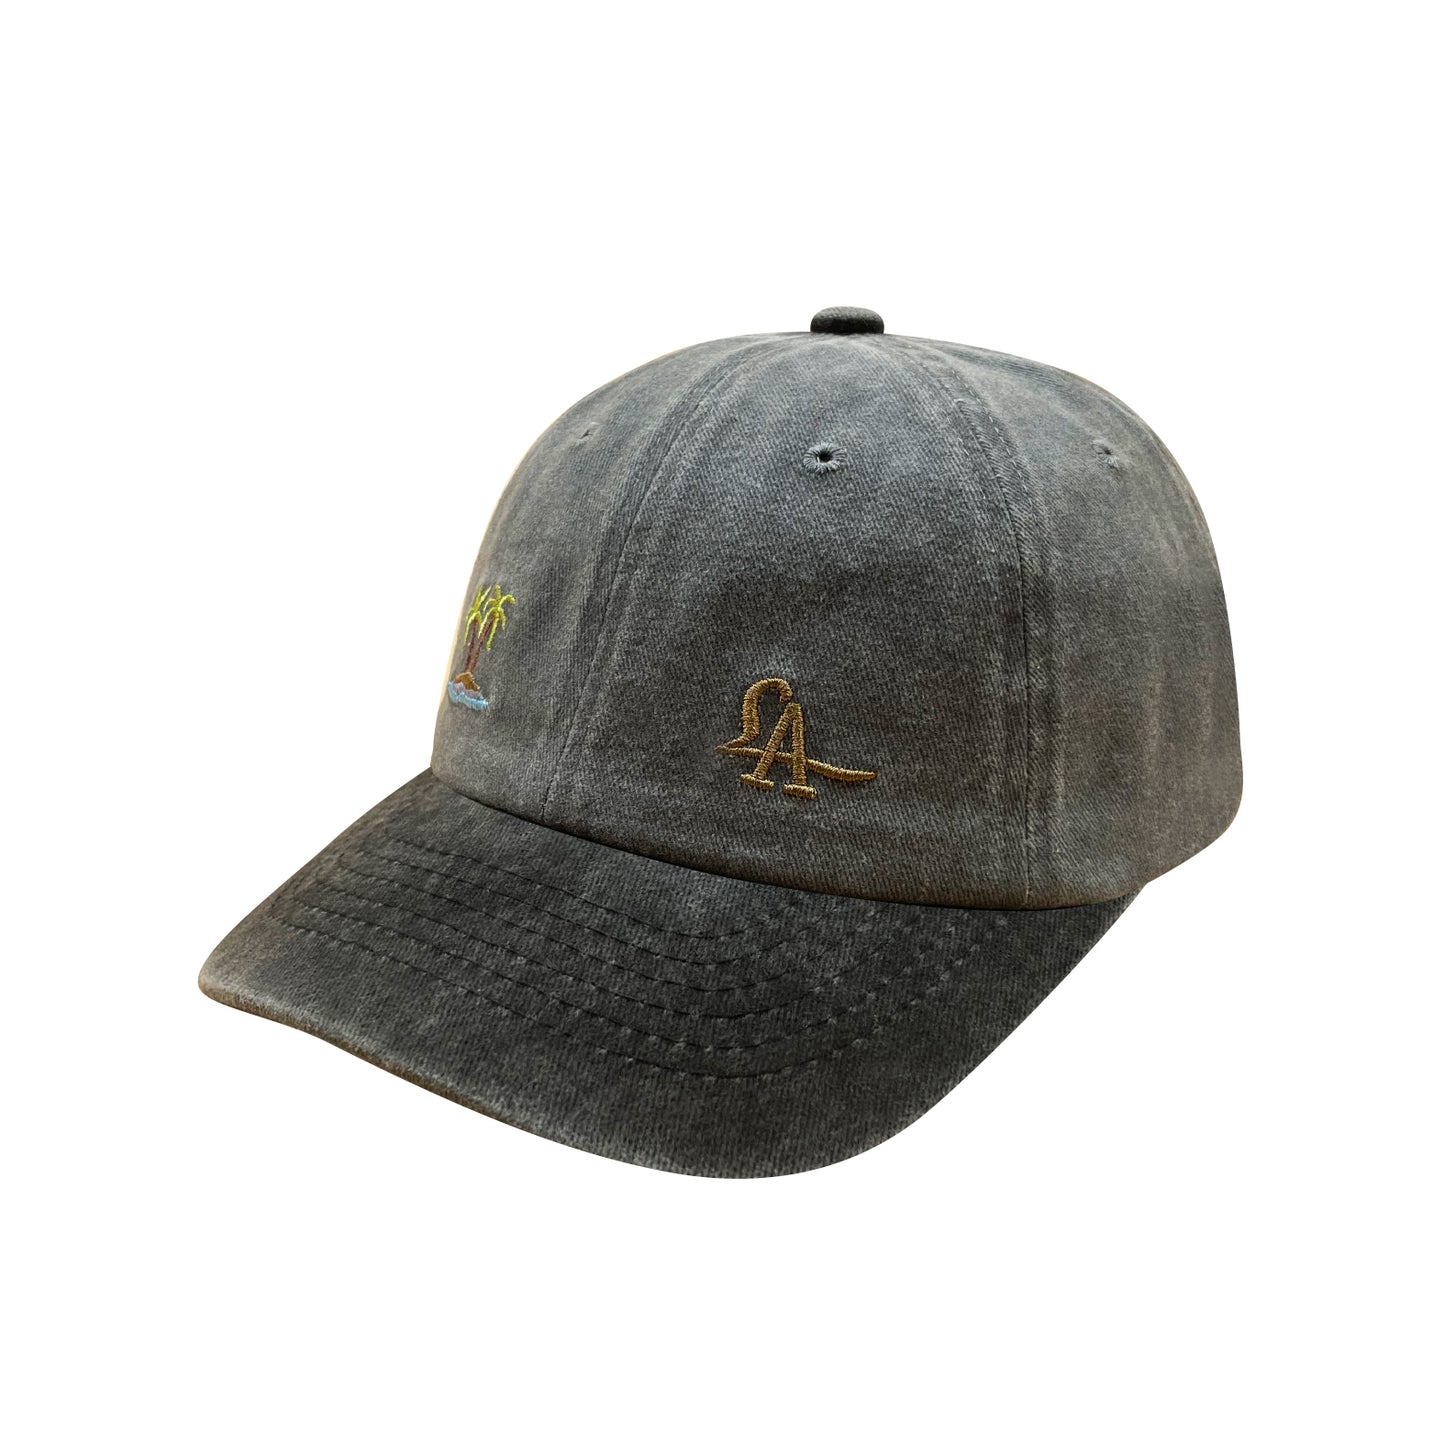 Lust Angeles Oasis cap in washed grey/black